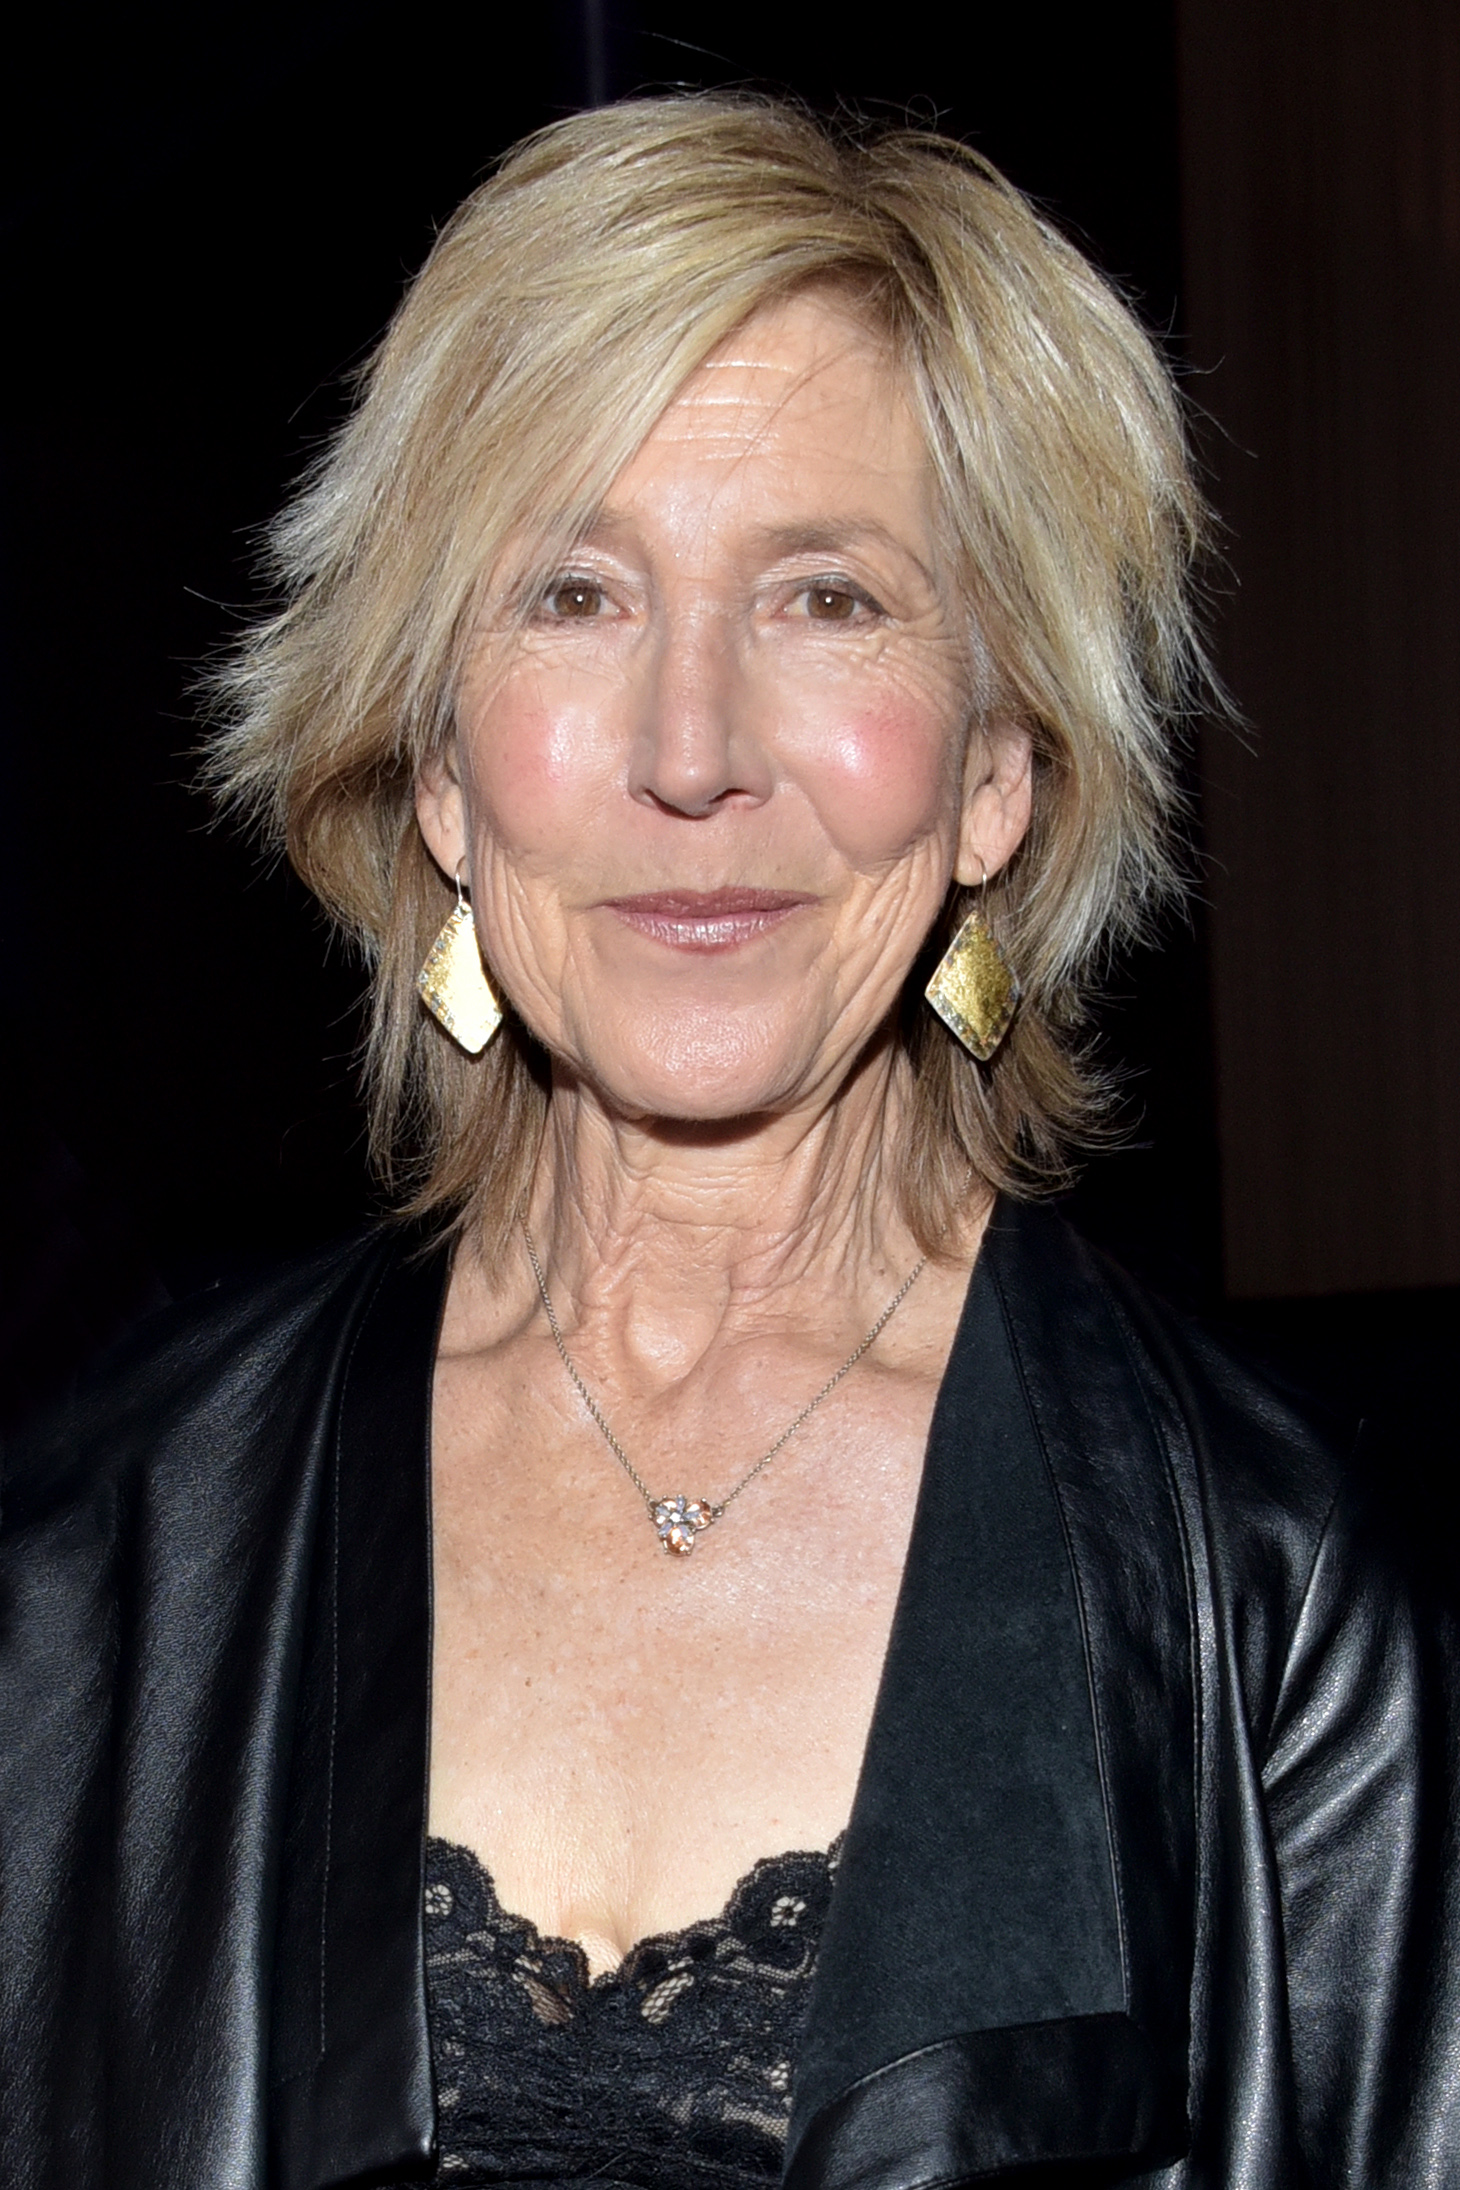 The 79-year old daughter of father (?) and mother(?) Lin Shaye in 2022 photo. Lin Shaye earned a  million dollar salary - leaving the net worth at 2 million in 2022